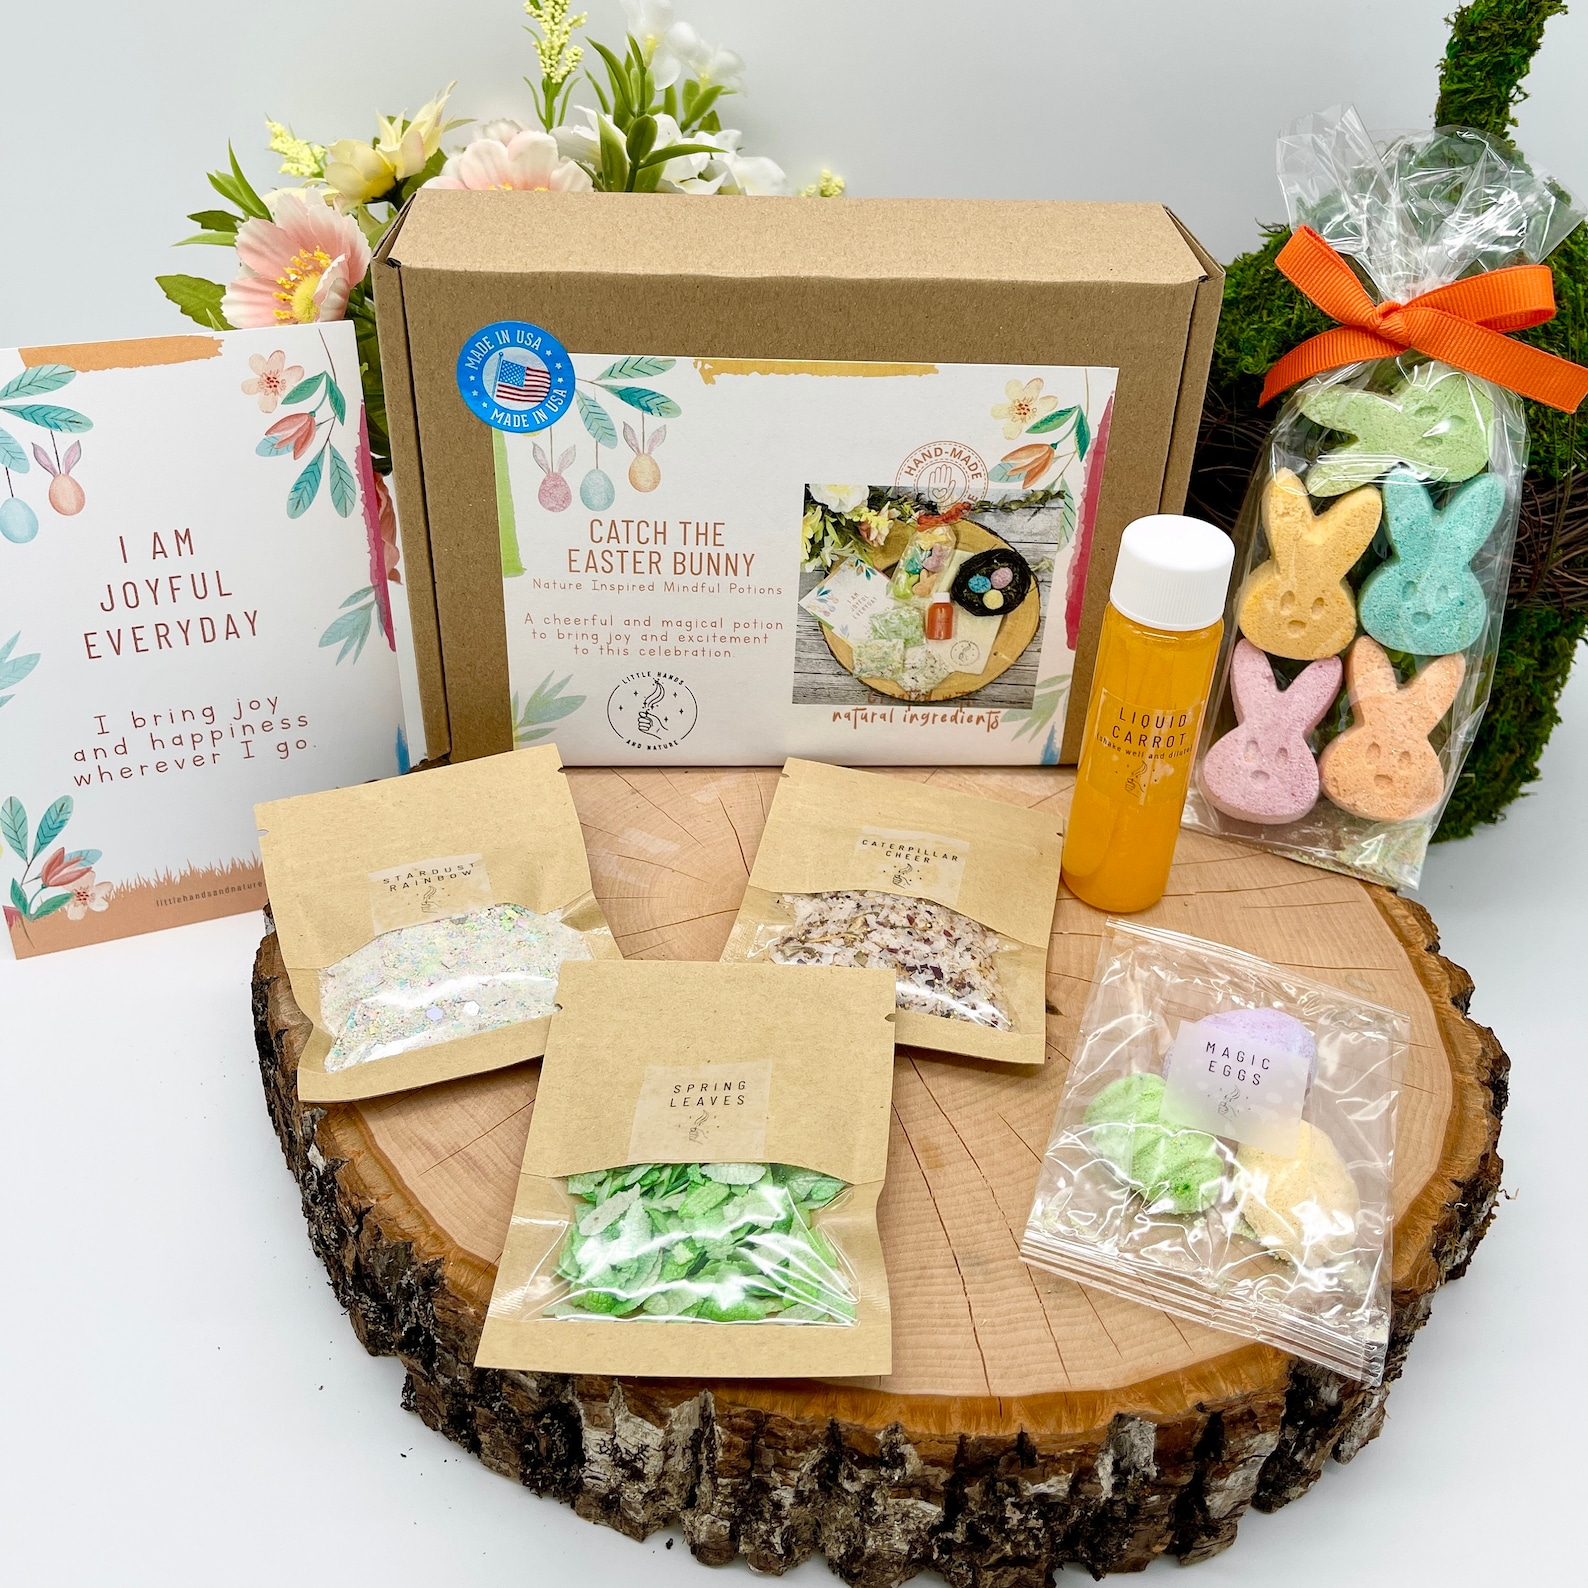 Catch the Bunny Easter Potion and Magic Bunnies Sensory Kit